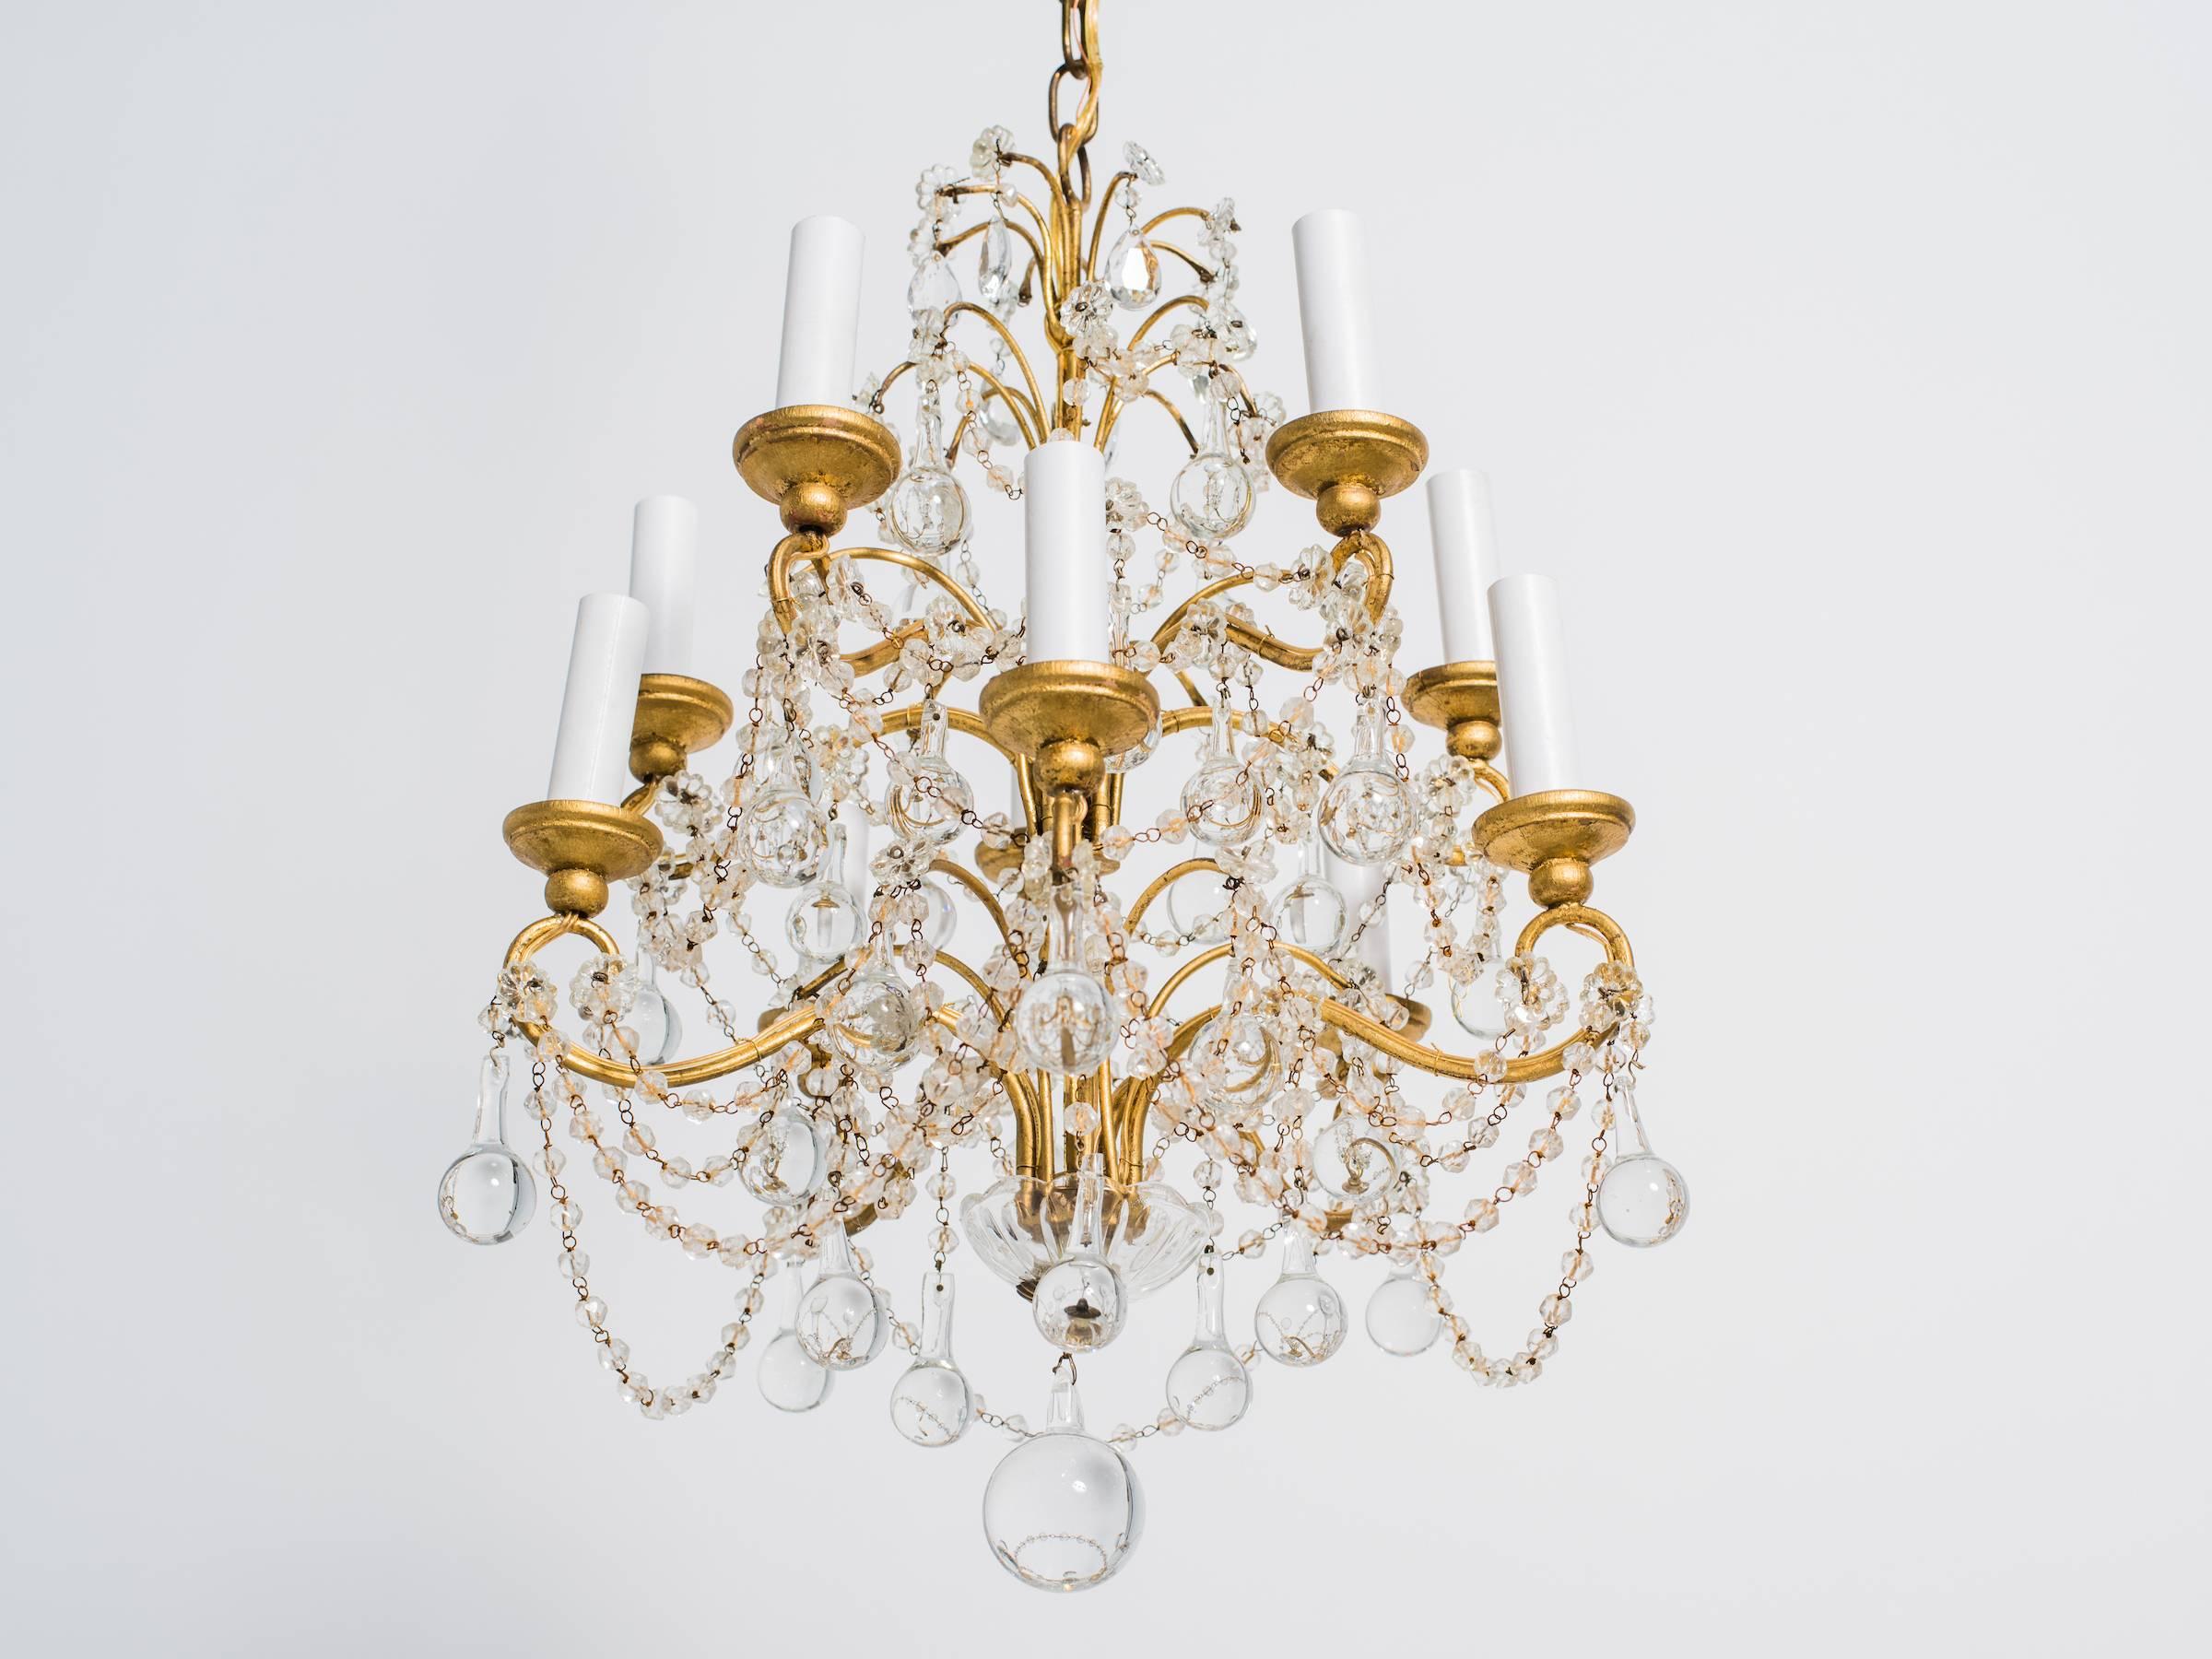 Mid-20th Century Italian Crystal Drop and Giltwood Chandelier For Sale